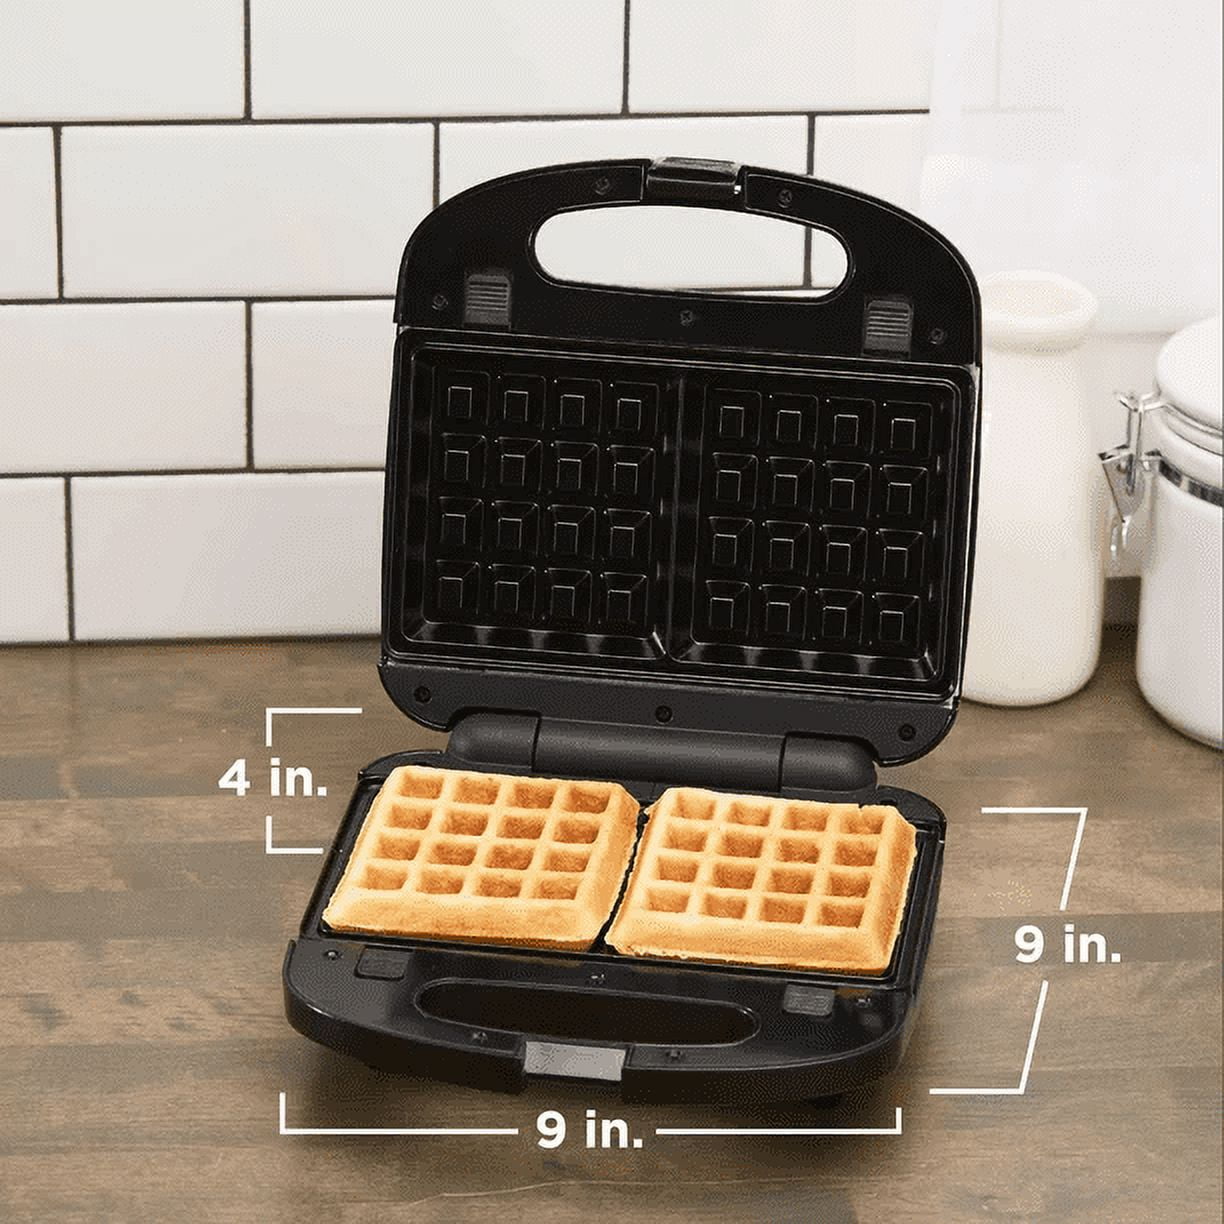 Reemix 3-in-1 Waffle, Grill & Sandwich Maker, Panini Press Grill and Waffle Iron Set with Removable Non-Stick Plates, Perfect for Cooking Grilled